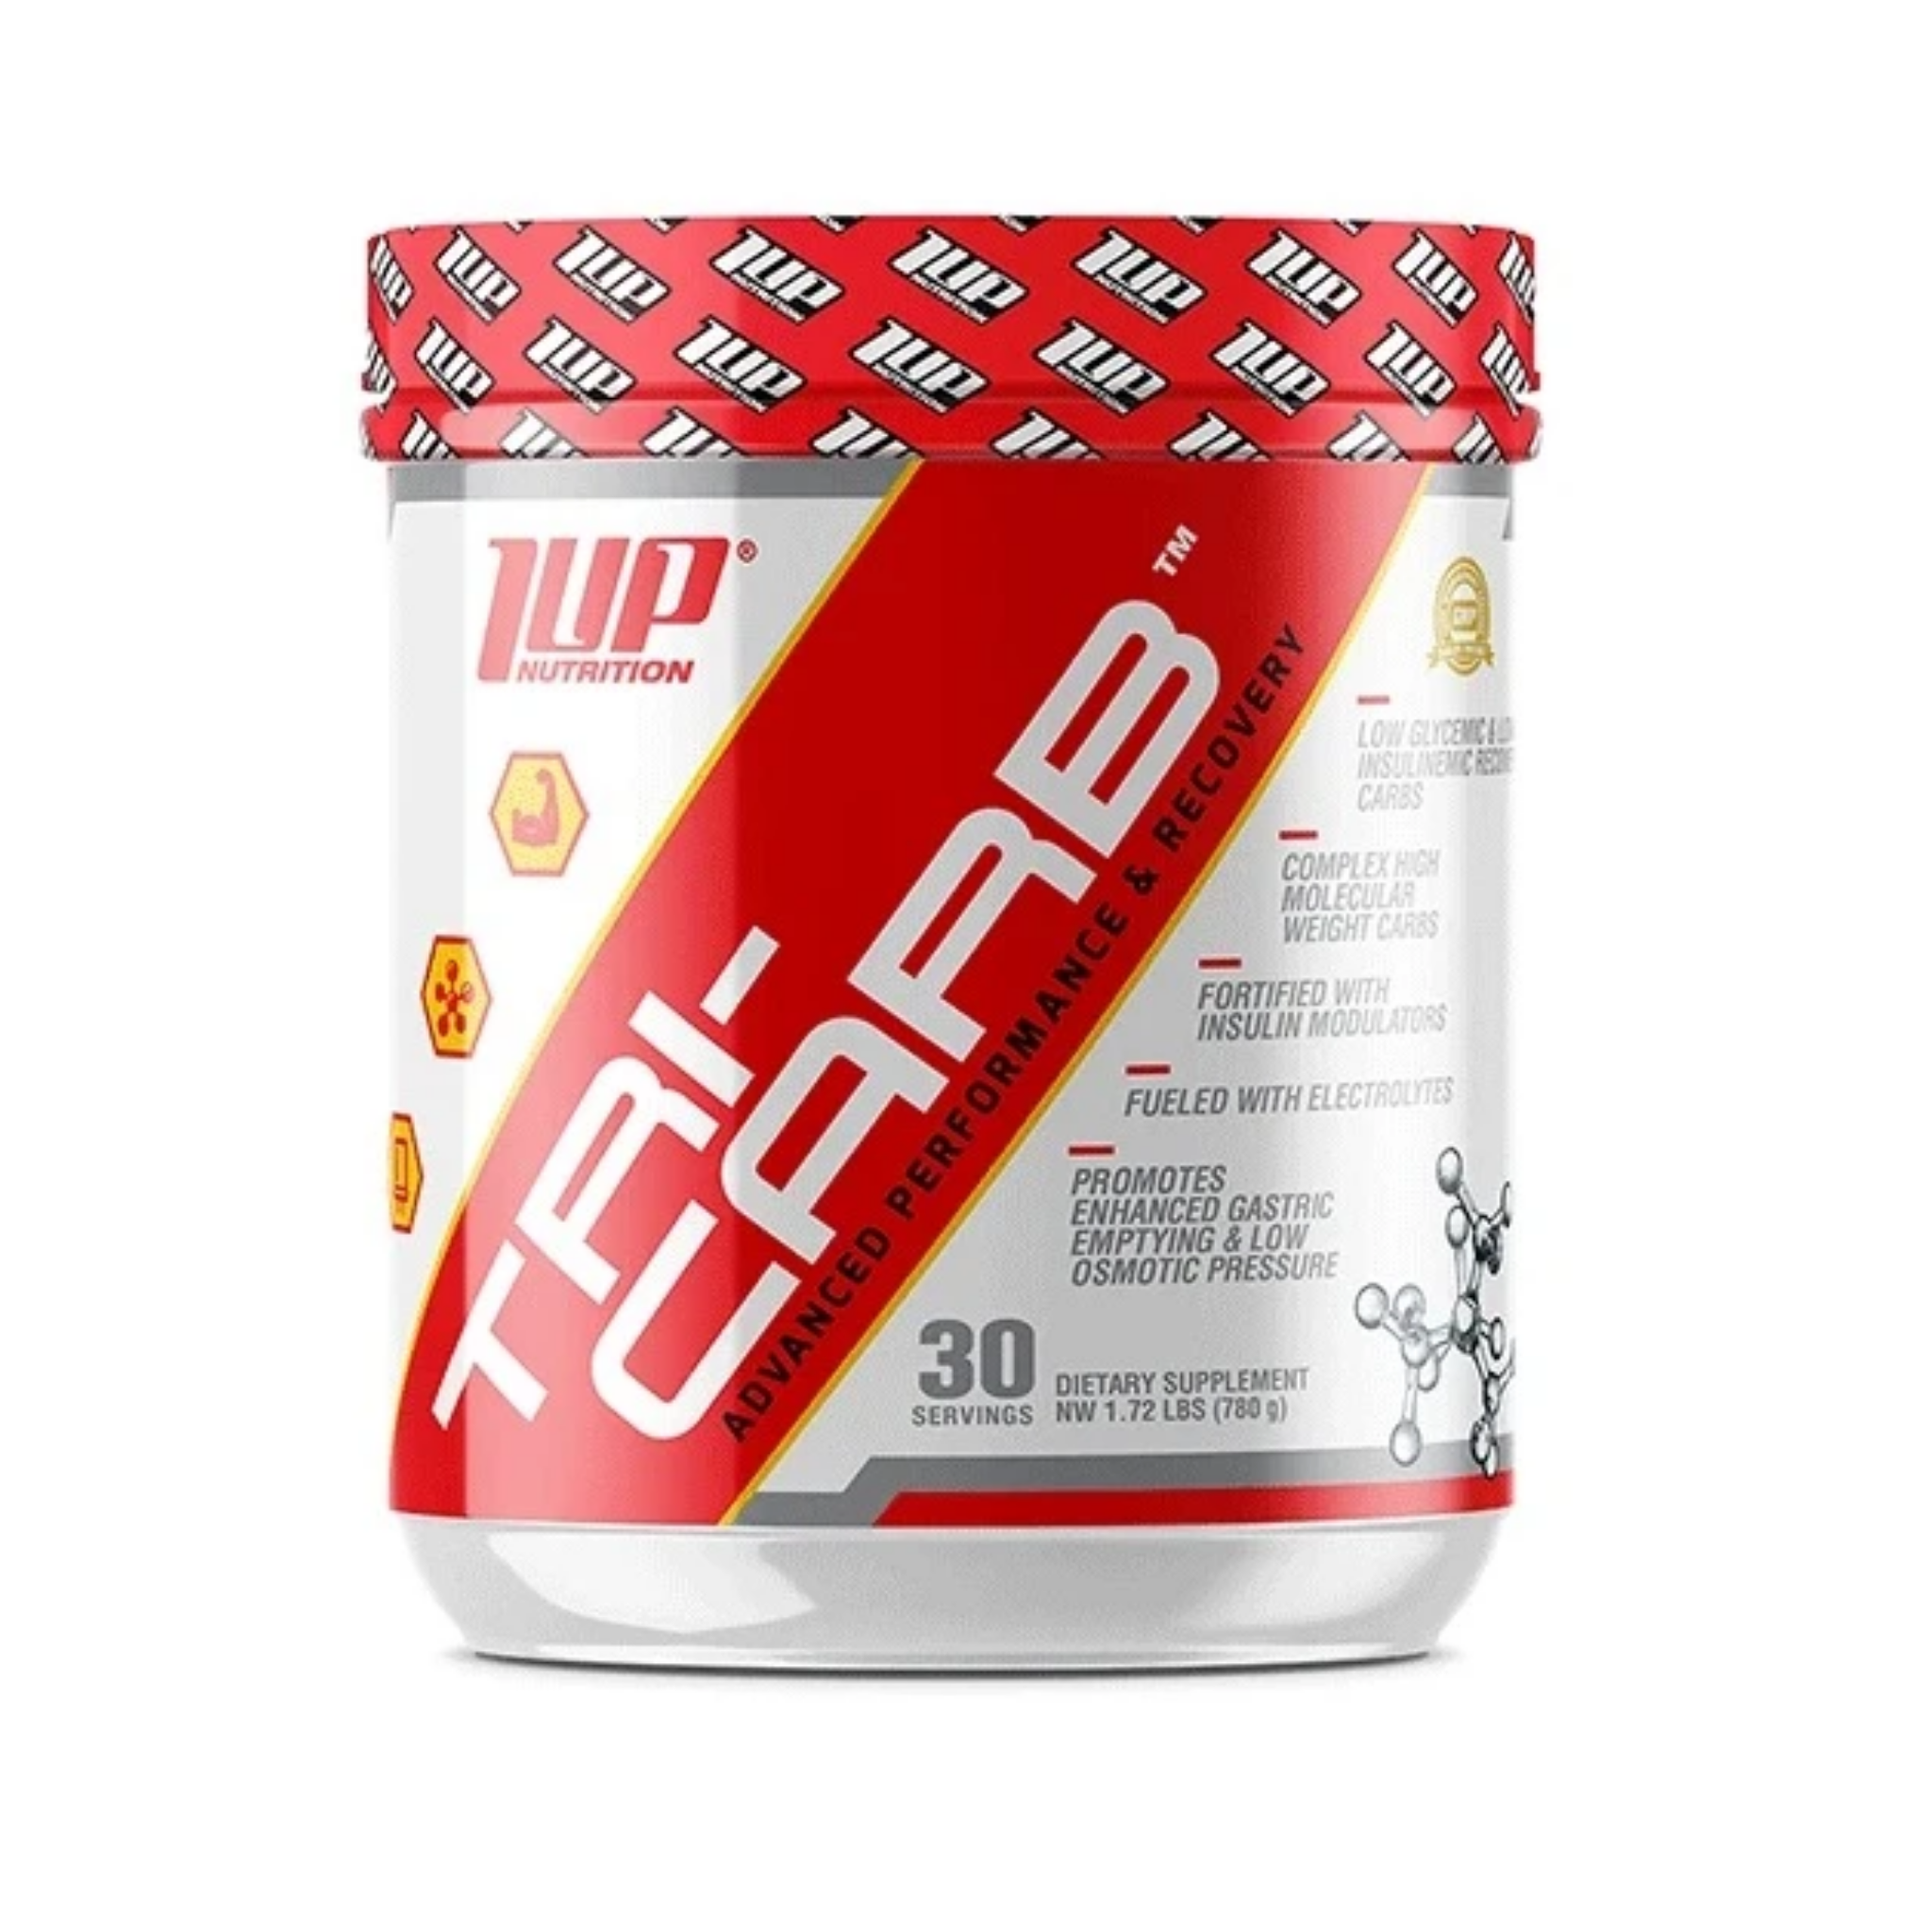 1Up Nutrition Tri-Carb